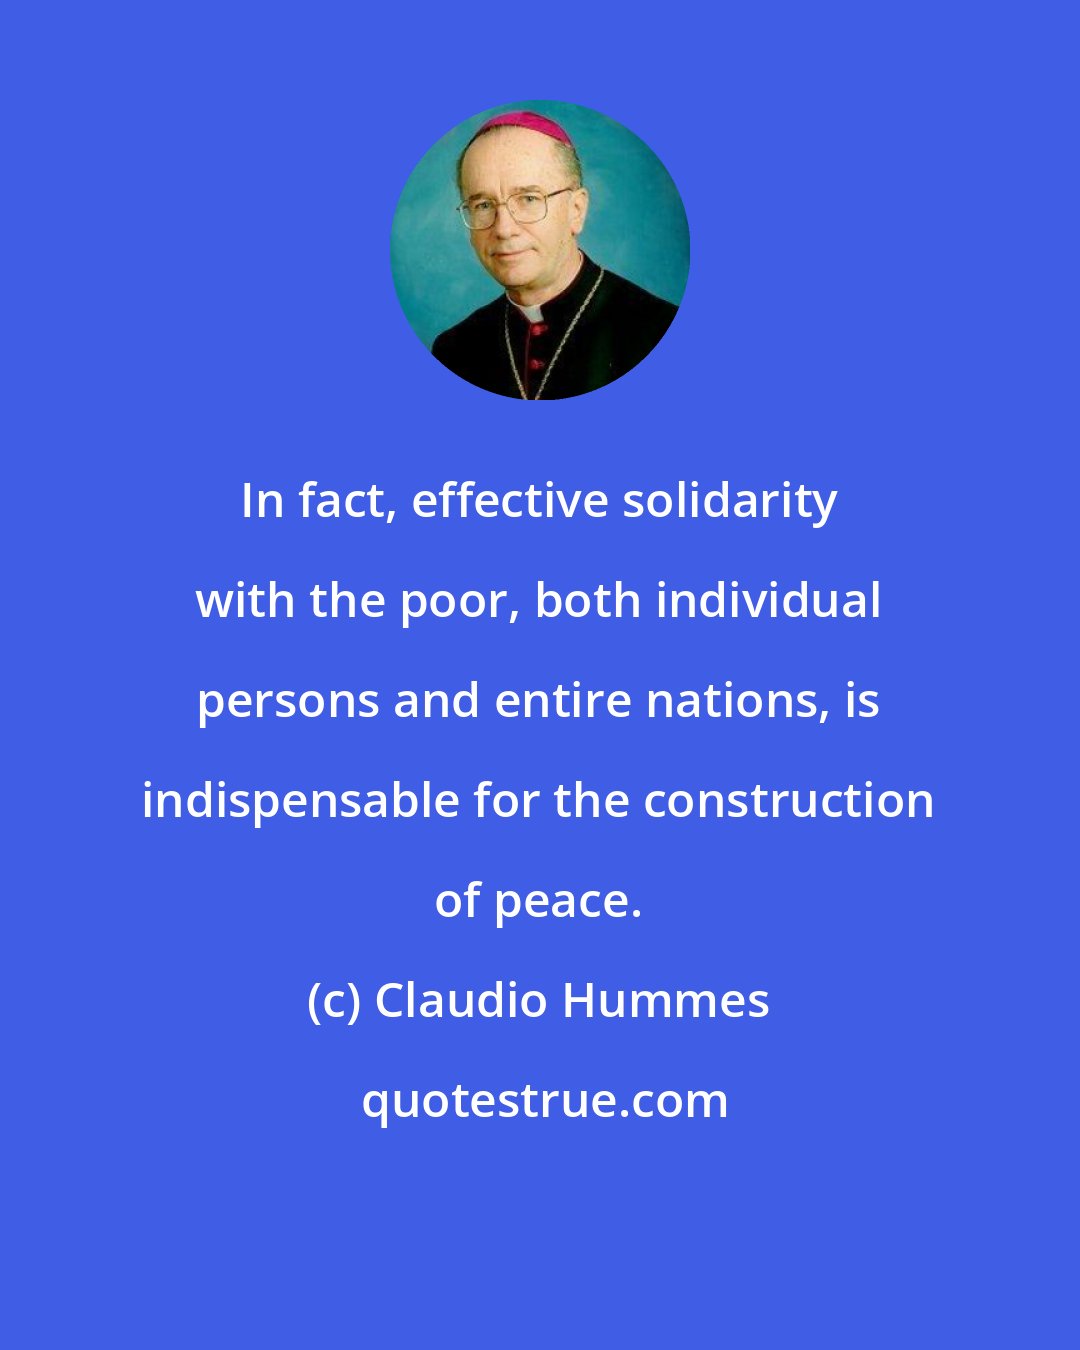 Claudio Hummes: In fact, effective solidarity with the poor, both individual persons and entire nations, is indispensable for the construction of peace.